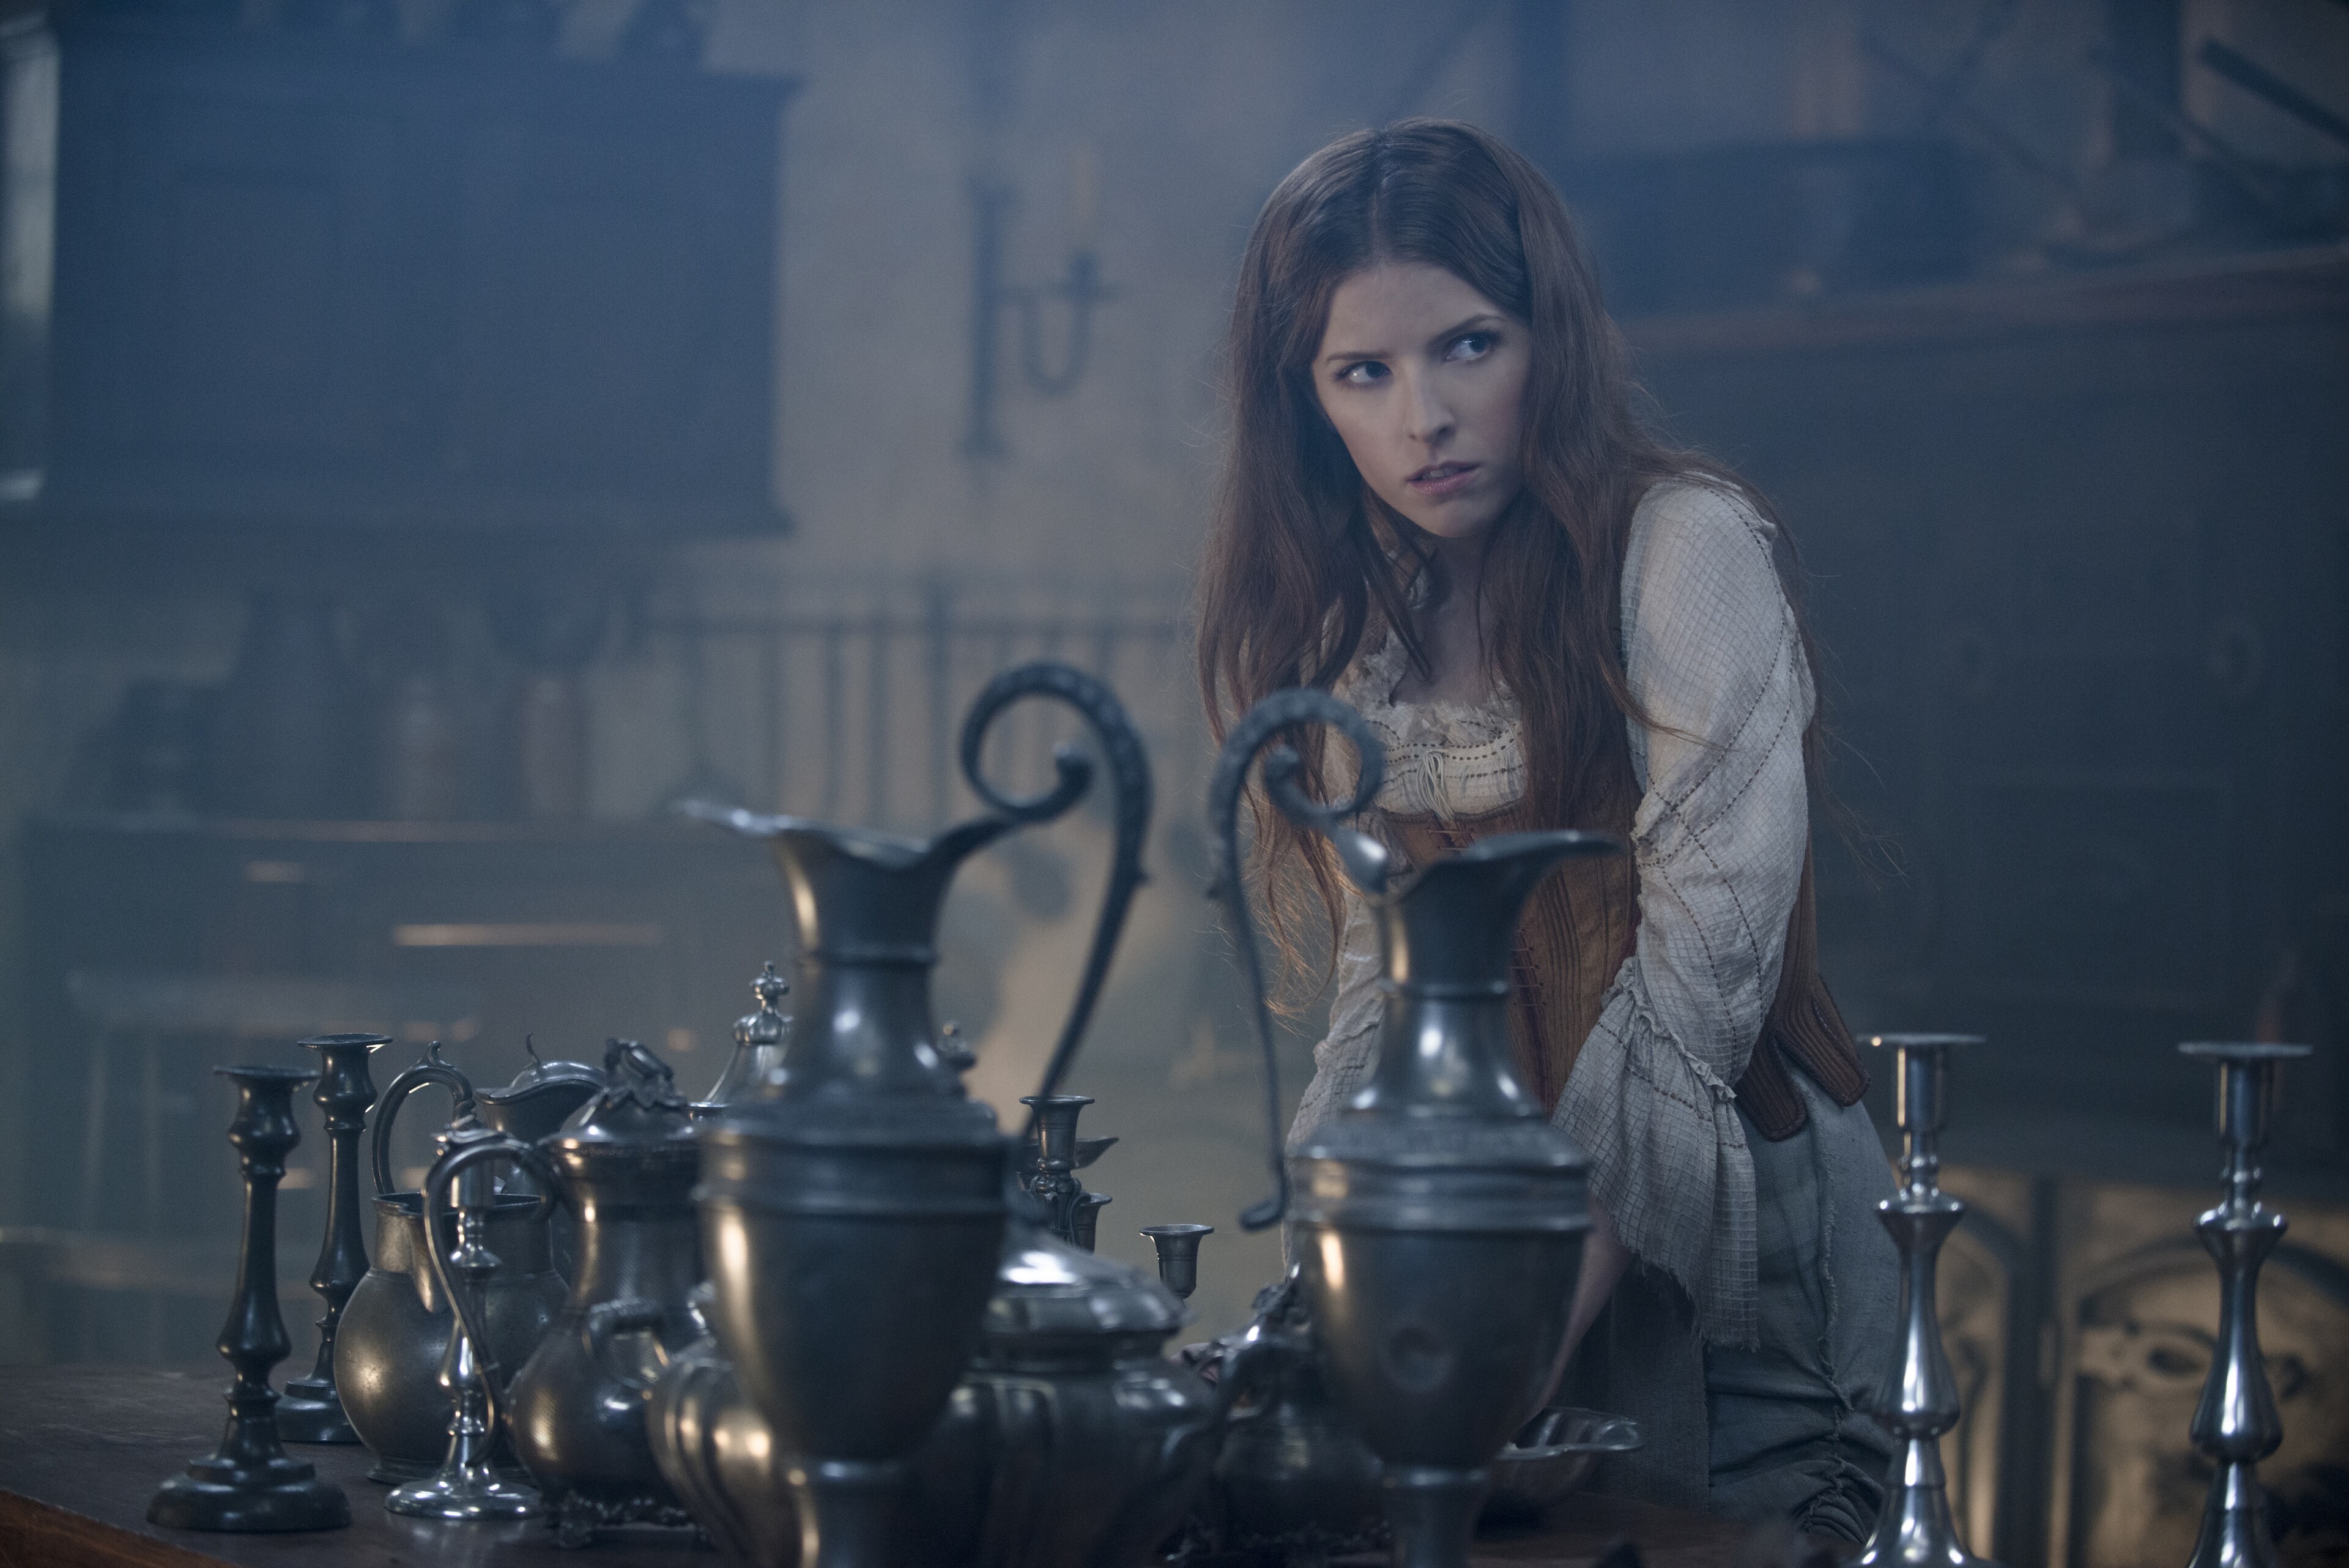 Anna Kendrick stars as Cinderella in “Into the Woods.” In theaters Dec. 25, 2014, the film showca...